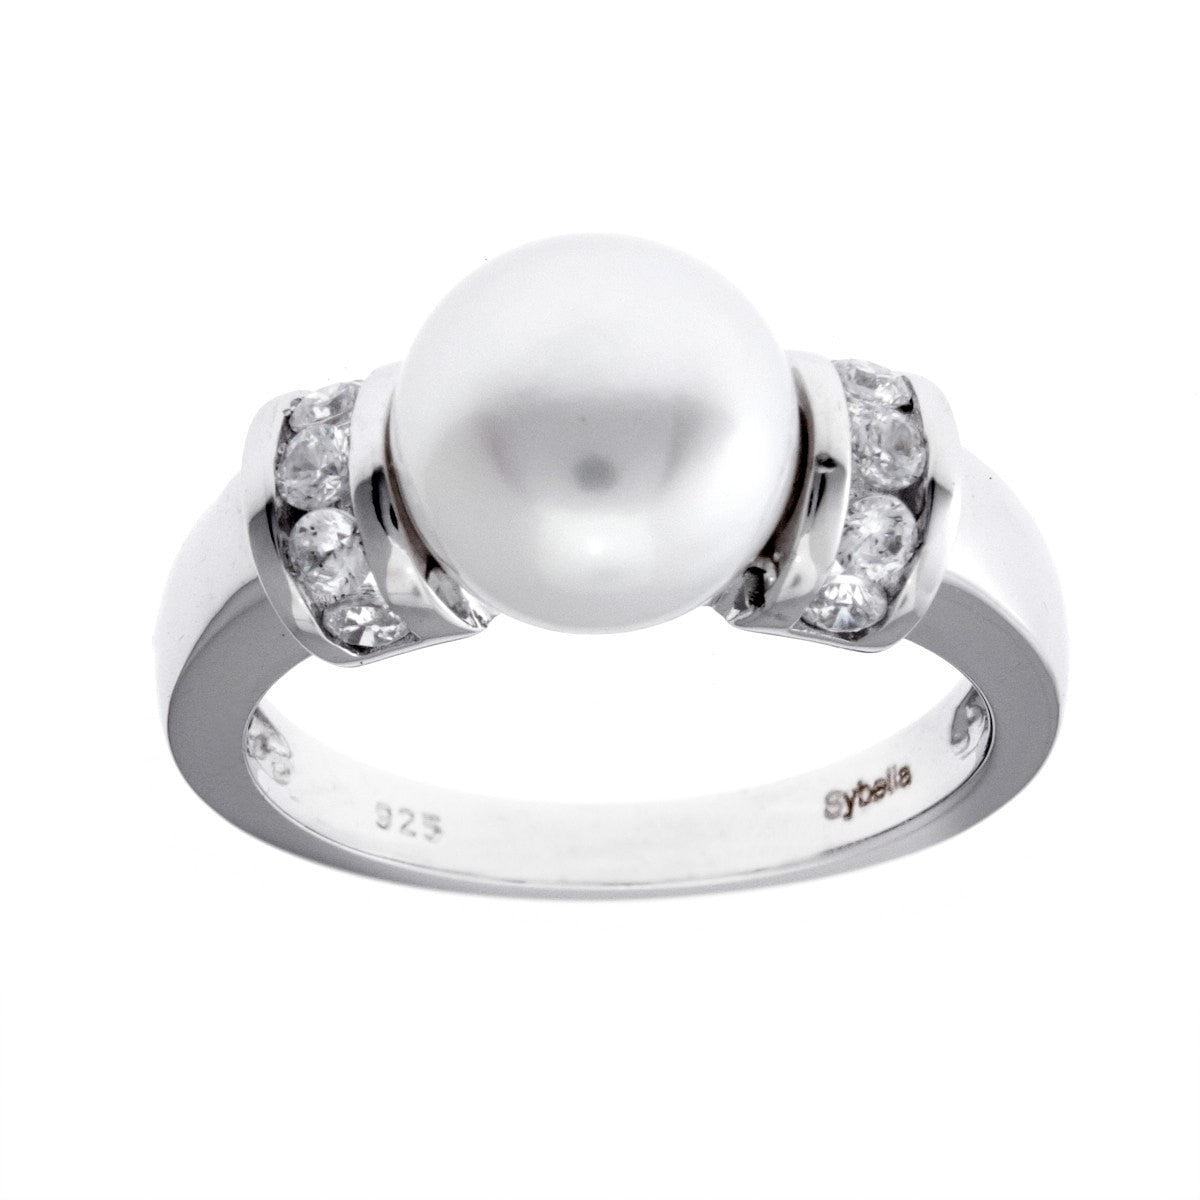 Sybella Rings Silver freshwater pearl dress ring